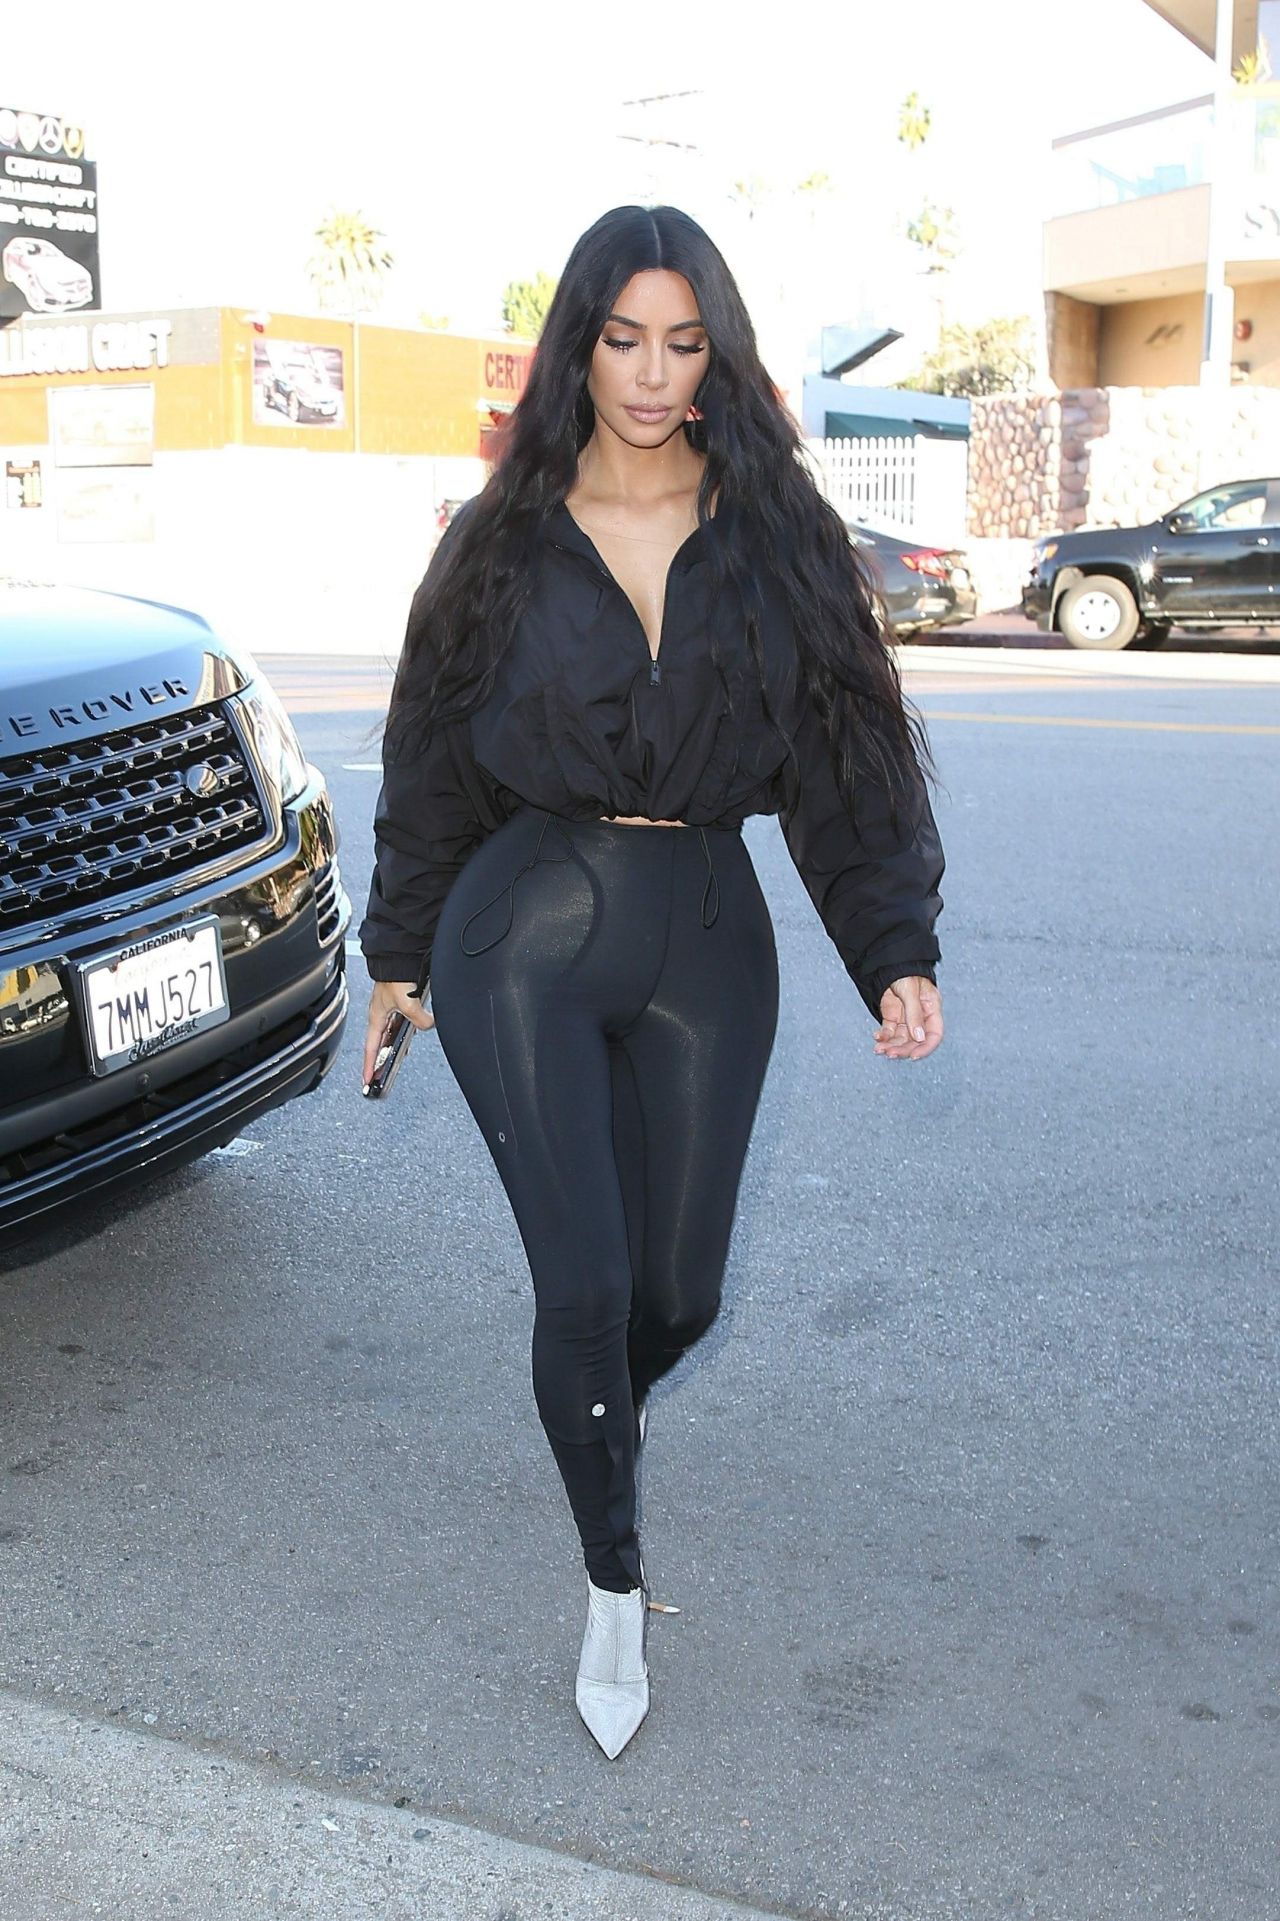 Kardashians In Tight Leggings: Photos Of Their Best Outfits – Hollywood Life